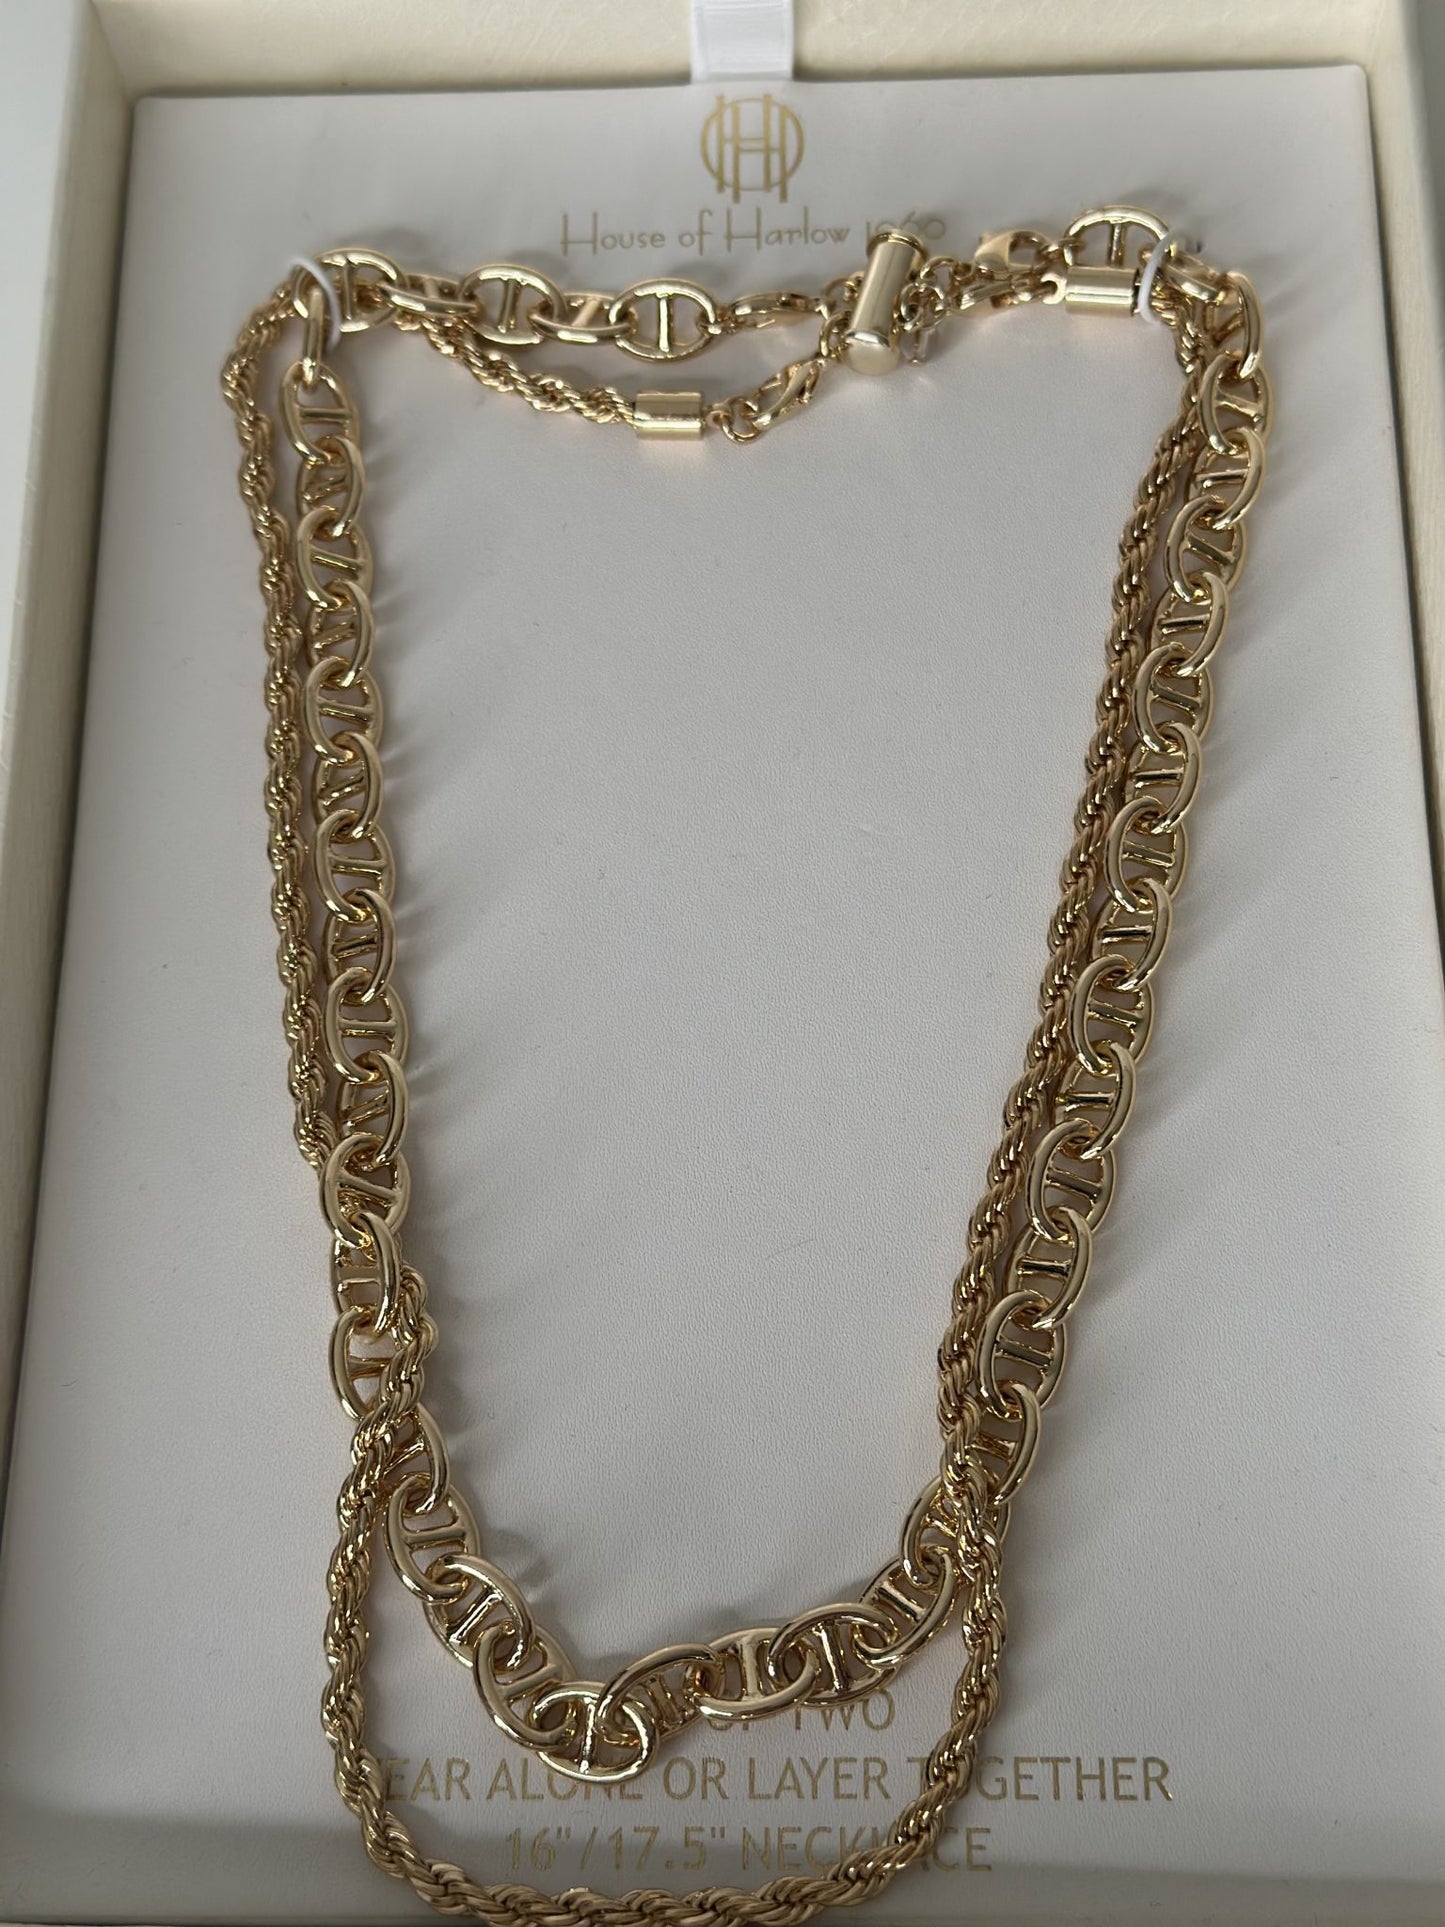 House of Harlow double chain